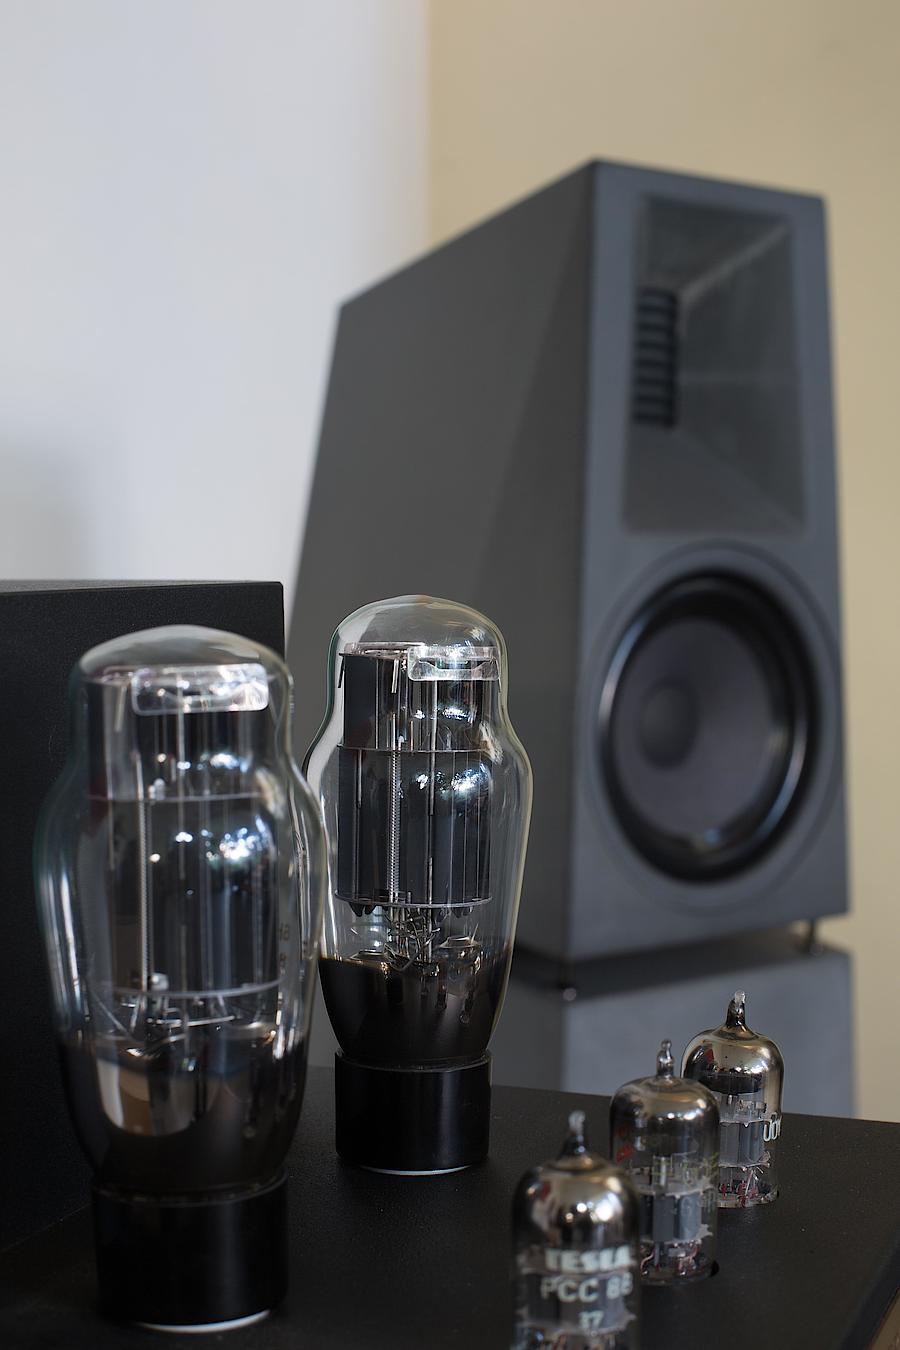 Best speakers in the world? - Audio Science Review (ASR) Forum